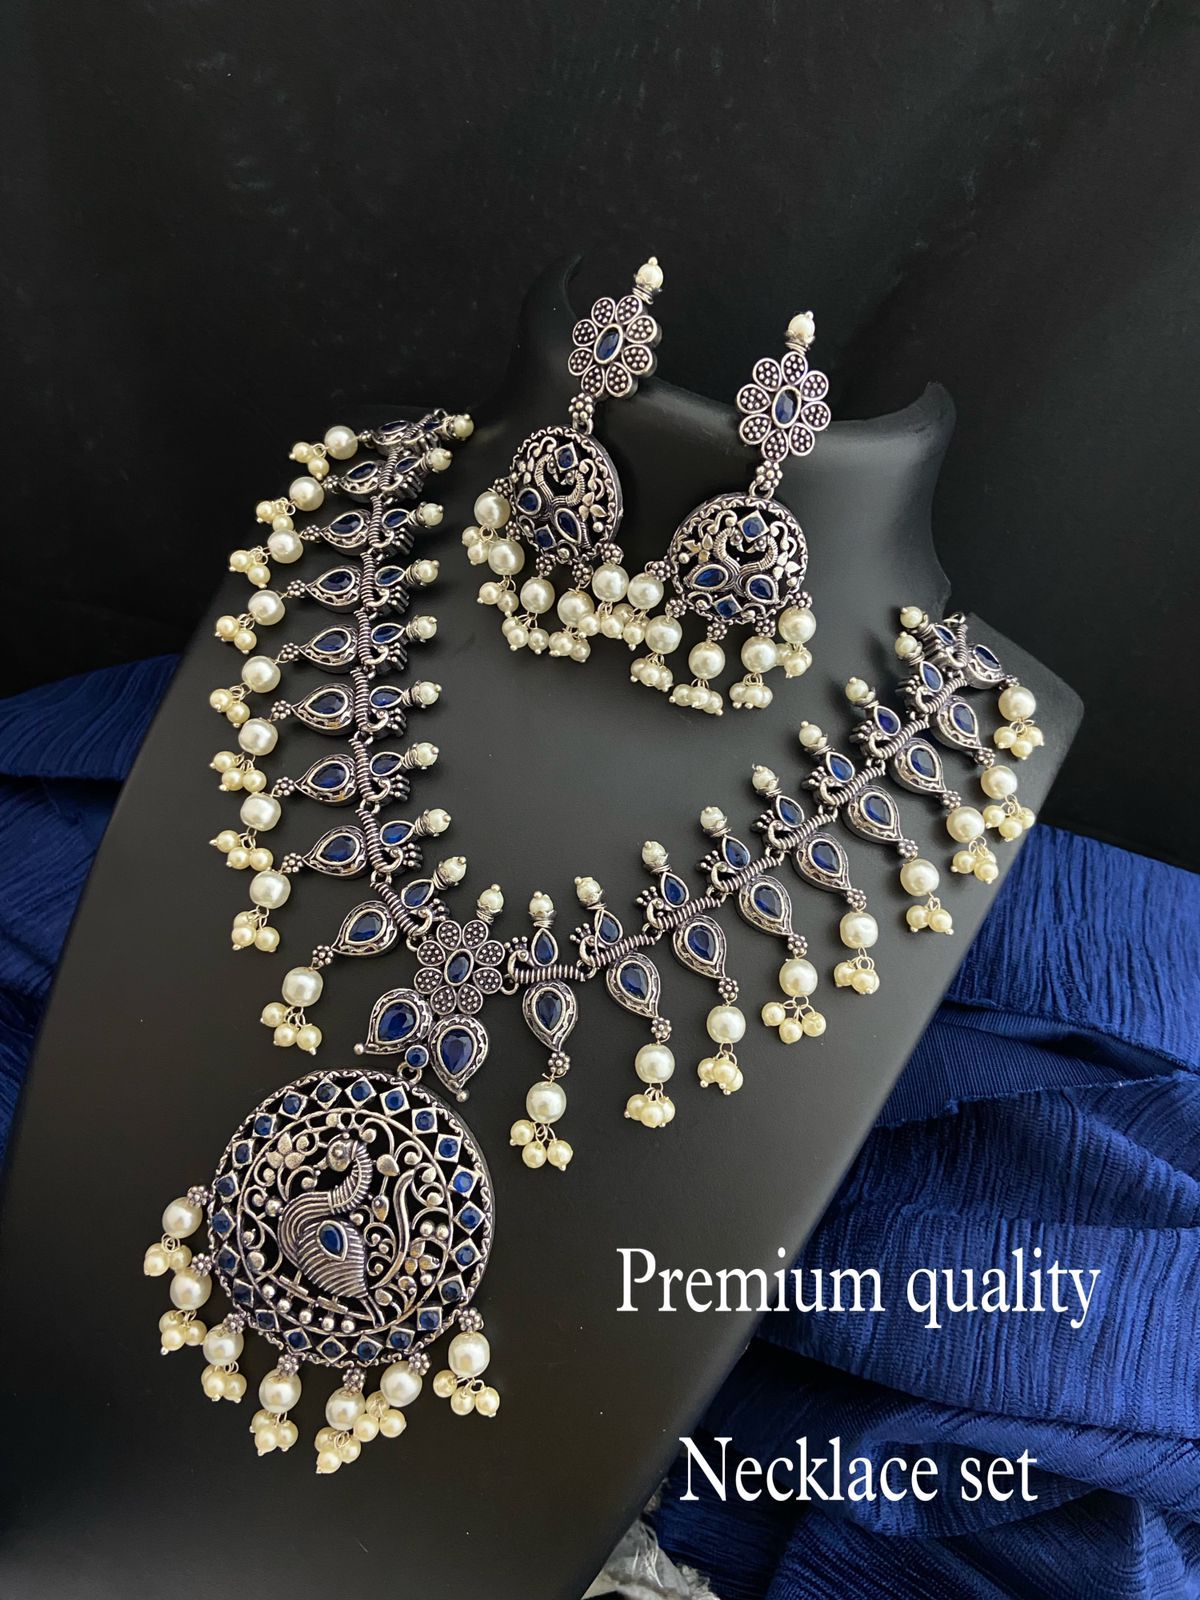 Trendy Indian Oxidized Necklace earring set with color stones | Antique look Bollywood Style German Silver Peacock Design Temple jewelry set